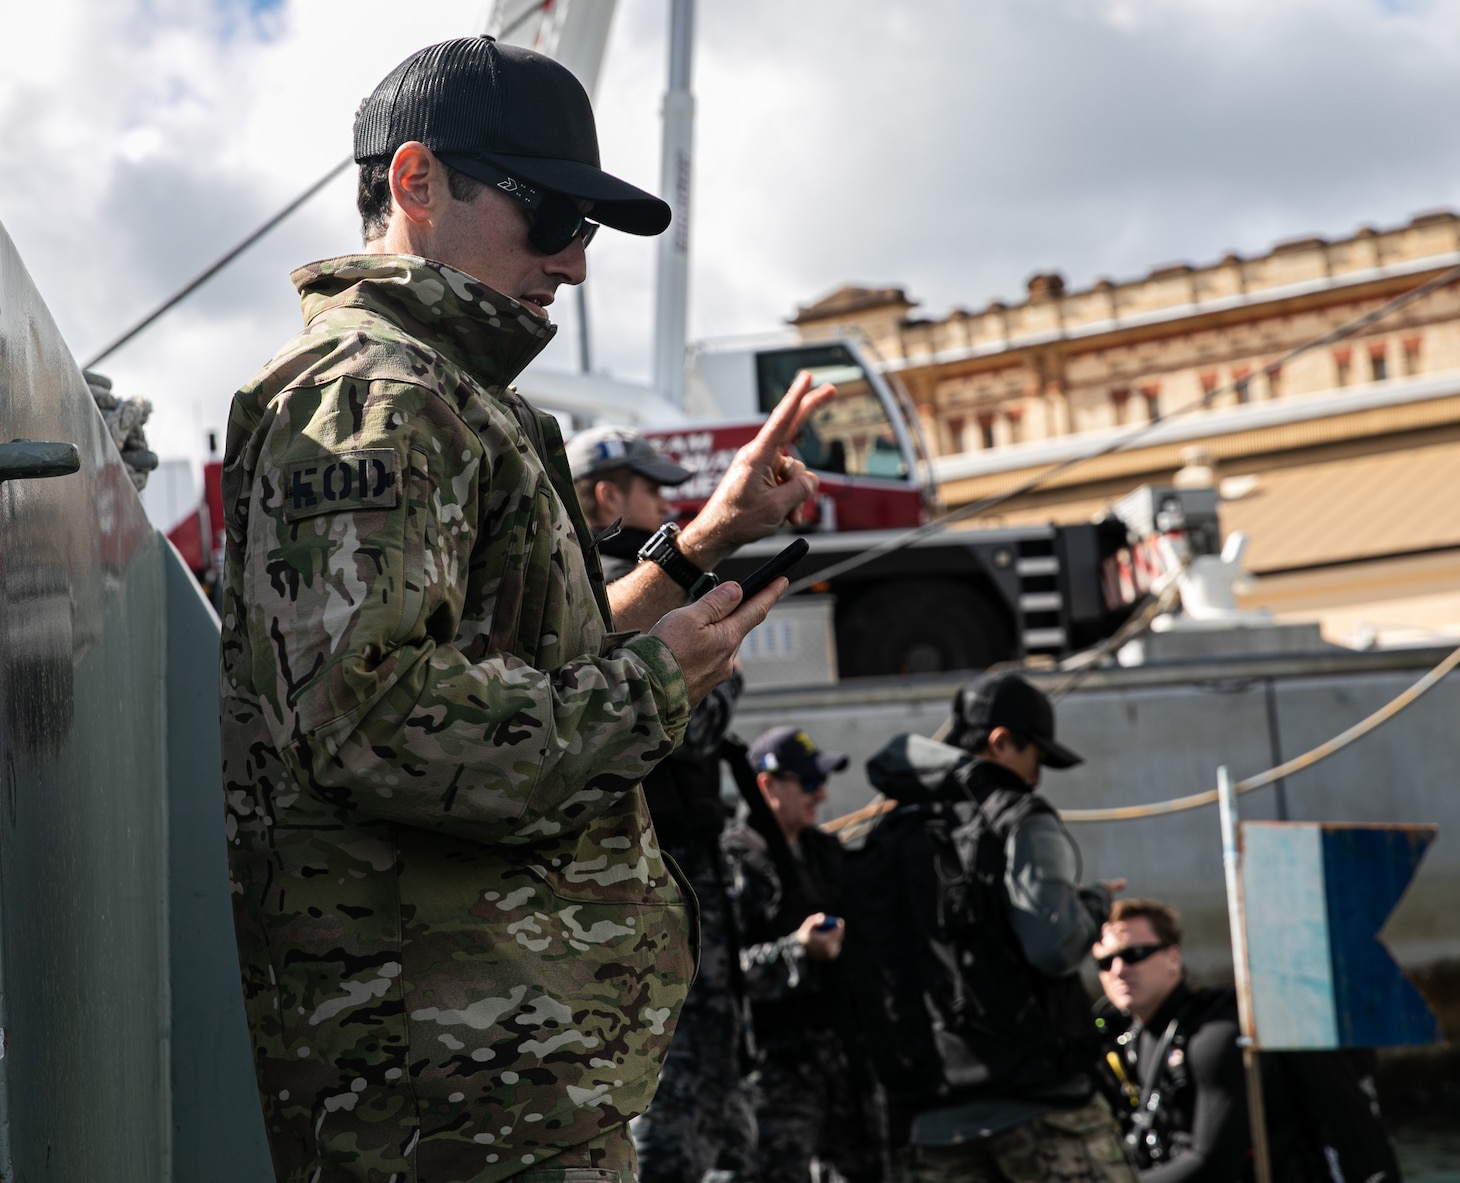 Lt. Jamison Ware, assigned to Explosive Ordnance Disposal Mobile Unit 5, Platoon 522, signals for divers leaving surface in Sydney, Australia, during Exercise Malabar 2023, August 15. This iteration of Malabar is the first year with Australia as the host country. Malabar 23 is a surface, air, and subsurface multilateral field training exercise conducted with the Royal Australian Navy, Indian Navy, Japan Maritime Self-Defense Force, and U.S. Navy that enhances interoperability and strengthens ties and critical partnerships between the maritime forces and demonstrates the countries commitment to the Indo-Pacific region.